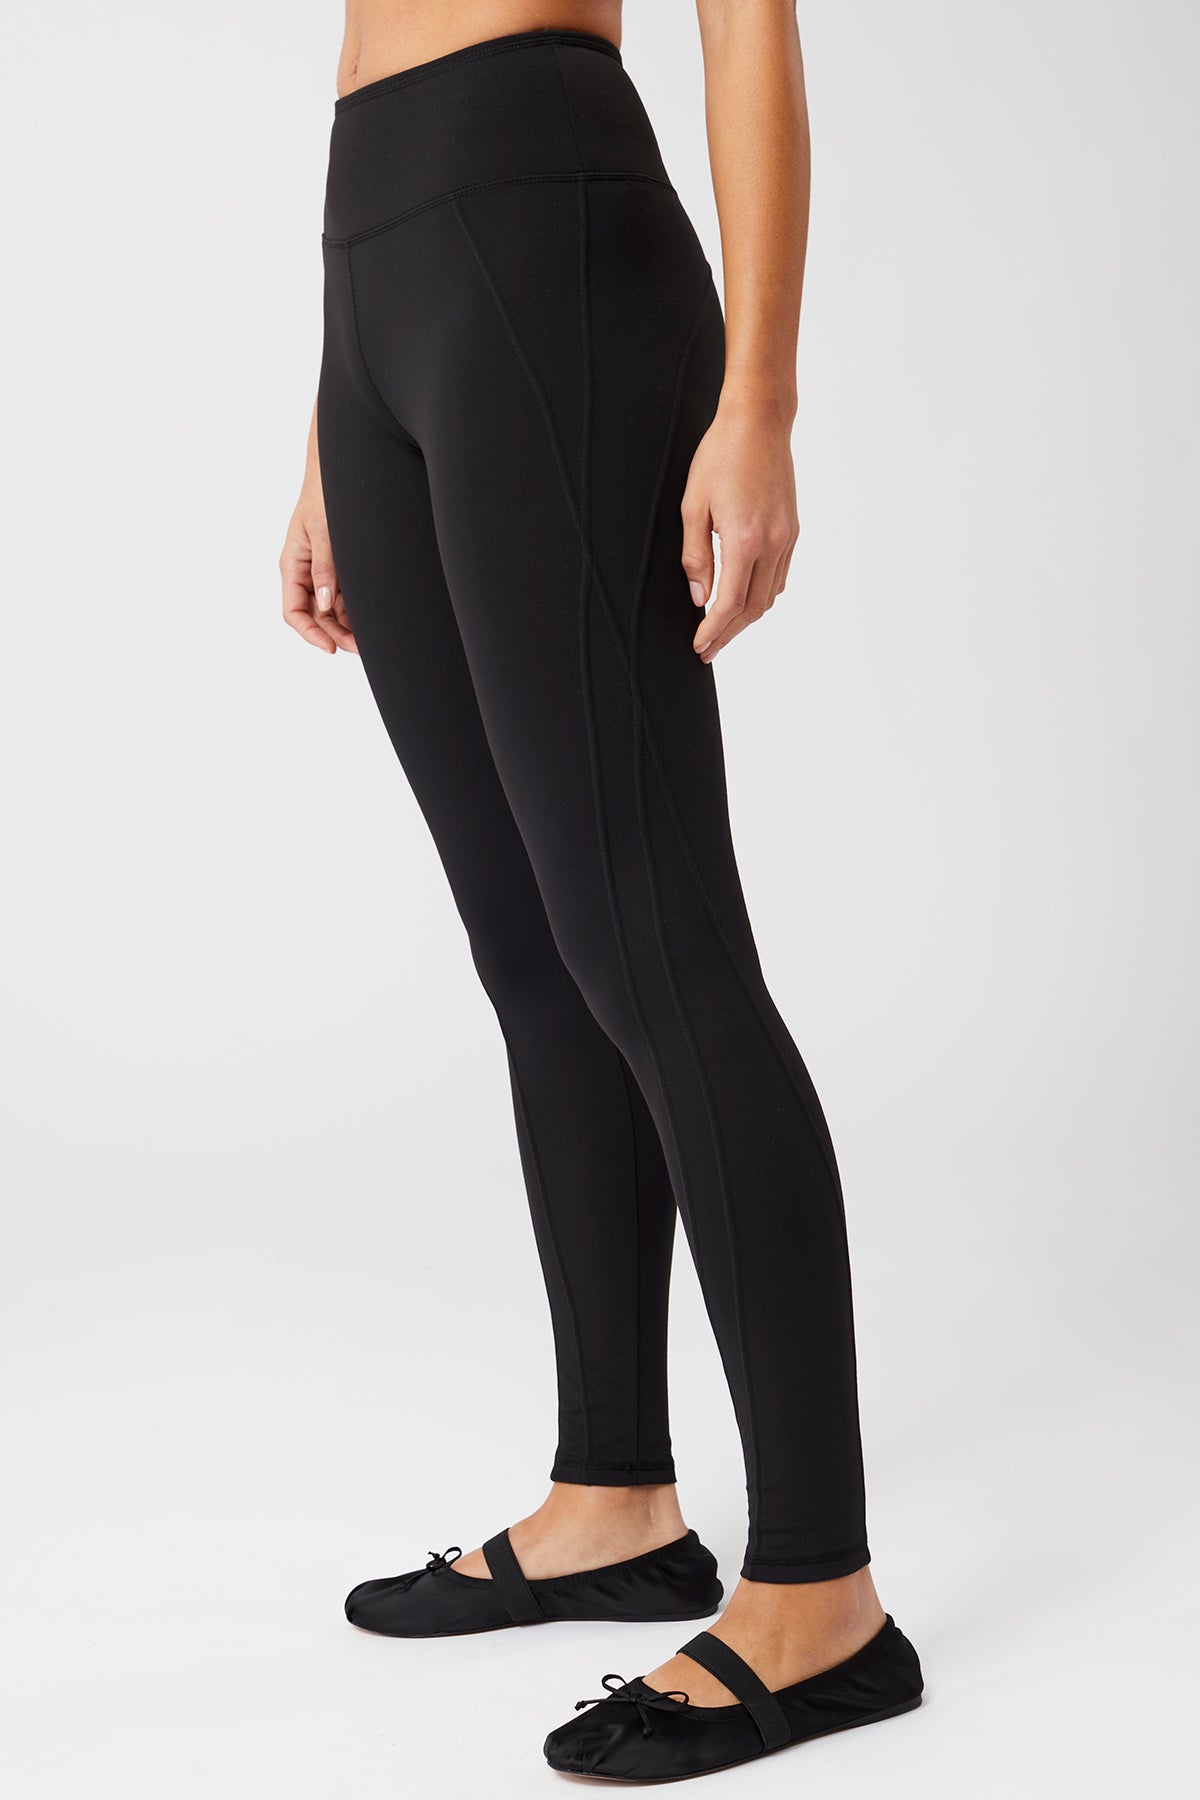 Yoga Wear out of recycled polyester – Page 2